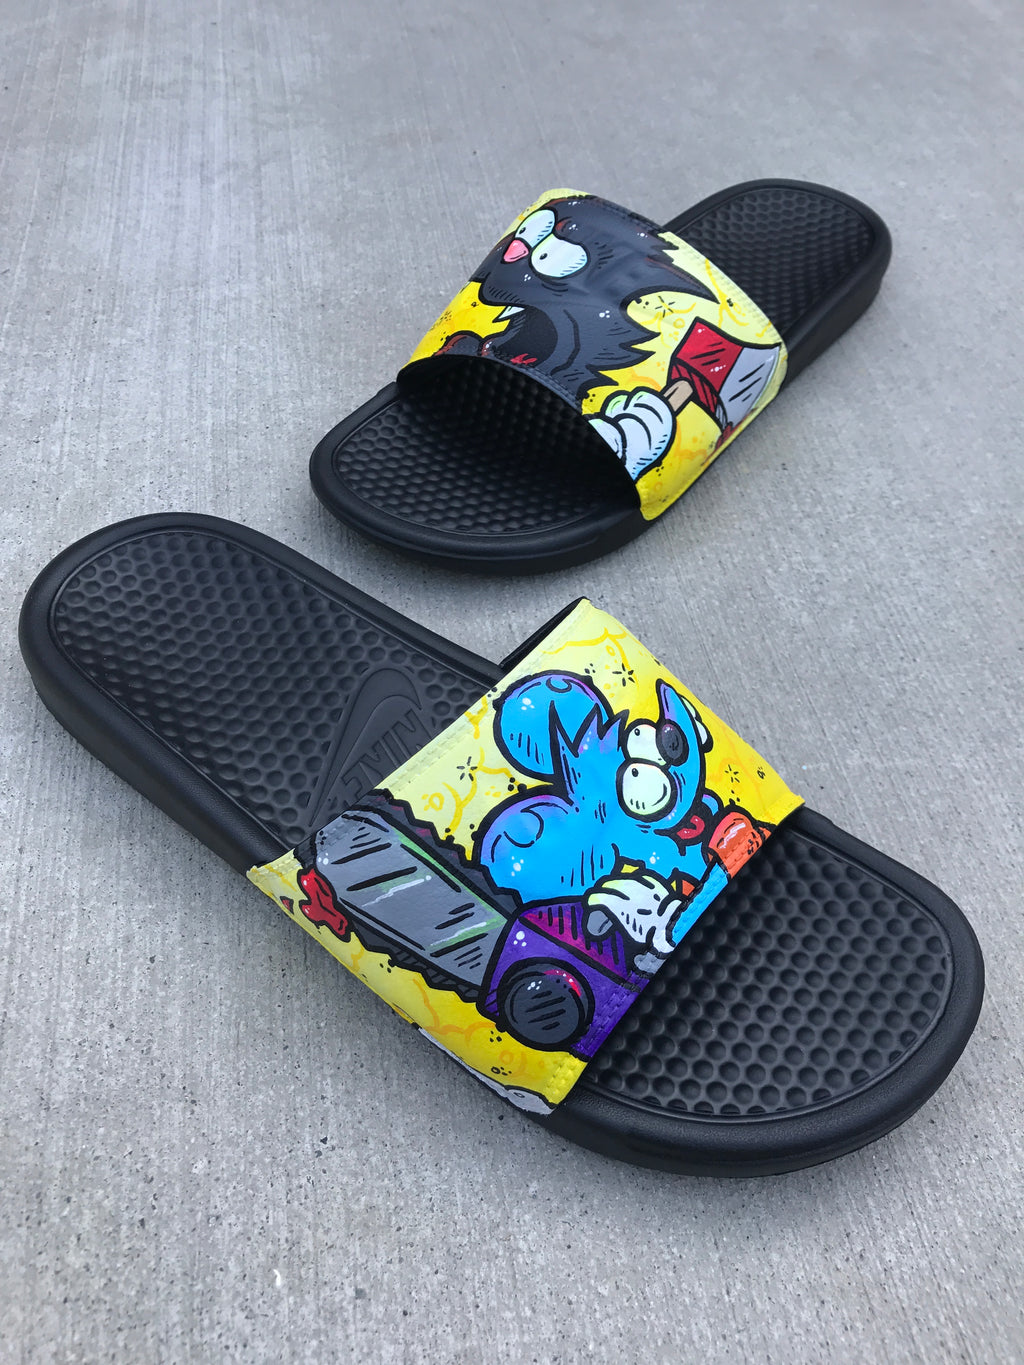 Itchy and Scratchy Simpsons Themed Hand Painted Nike Slides aka Sandals, Flip Flops